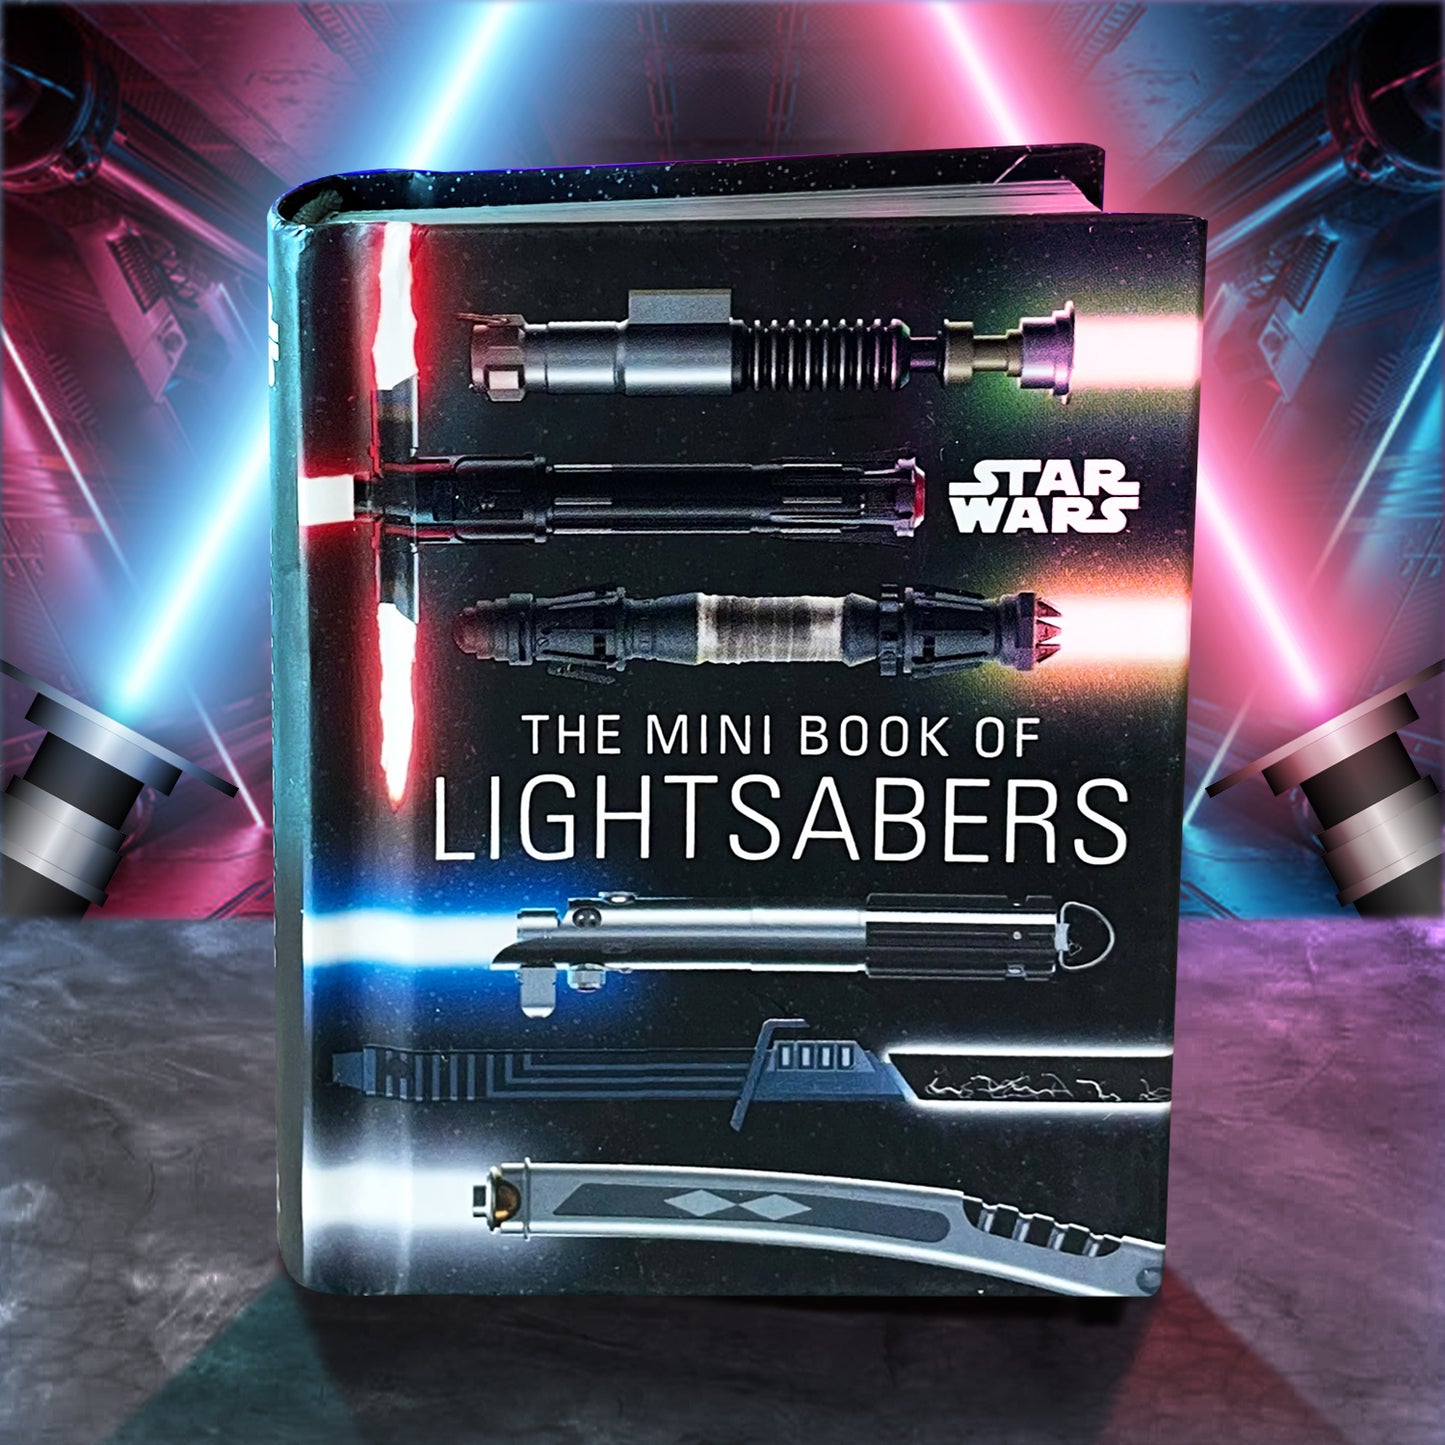 A small hardcover book titled "STAR WARS: The Mini Book of Lightsabers", with several lightstabers laying horizontally across the starry landscape. The background is a blue and red lightsaber in a dark ship. 